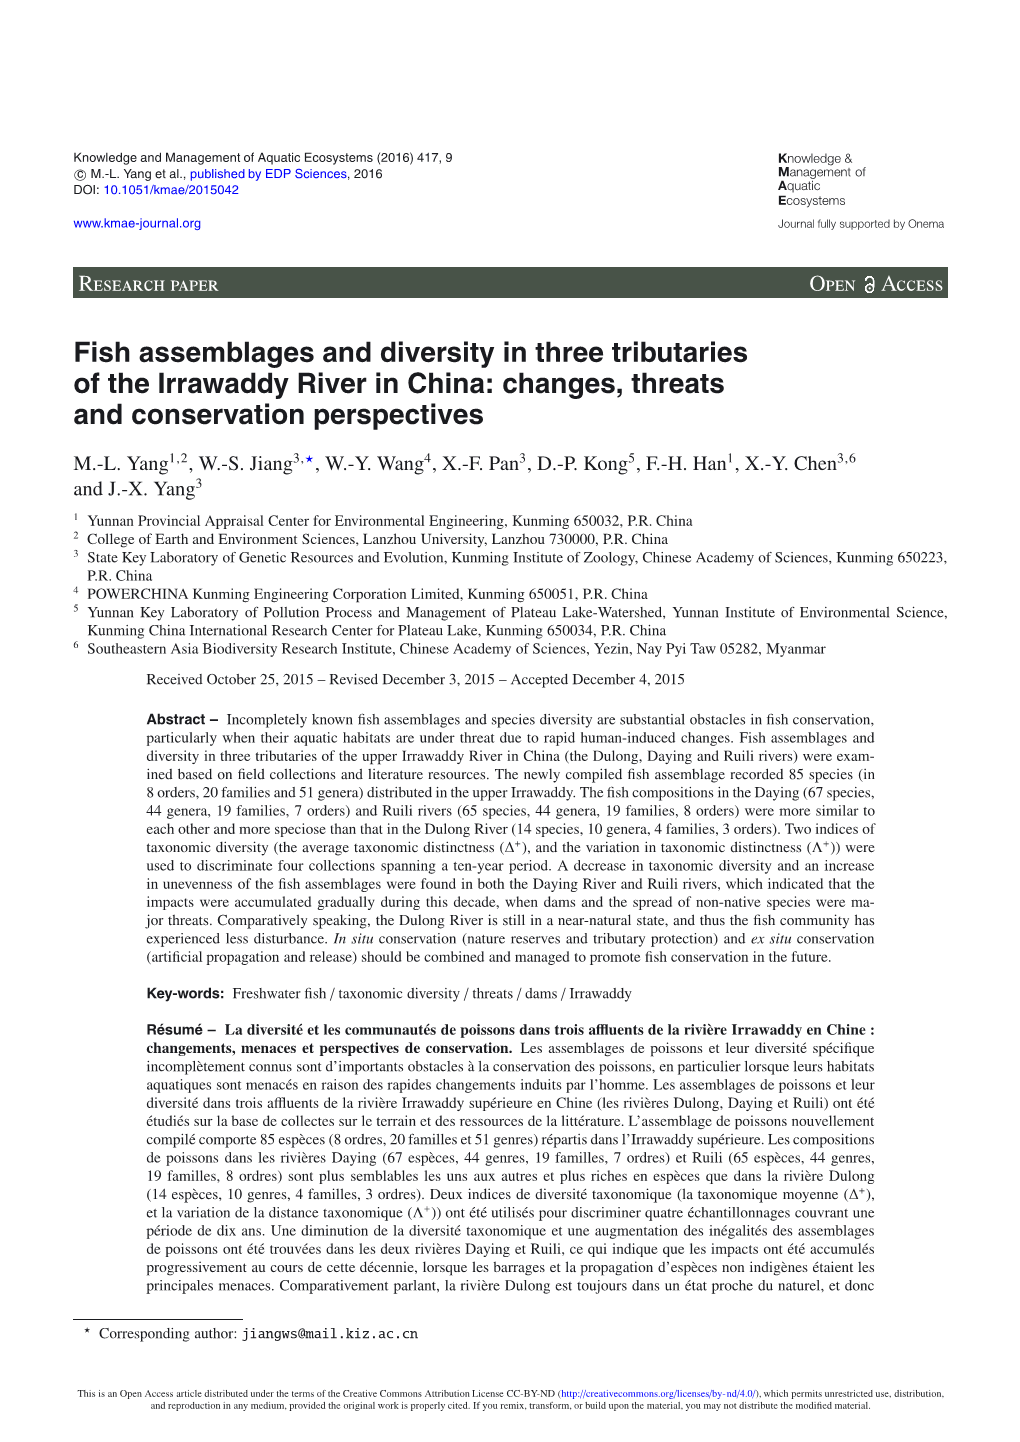 Fish Assemblages and Diversity in Three Tributaries of the Irrawaddy River in China: Changes, Threats and Conservation Perspectives